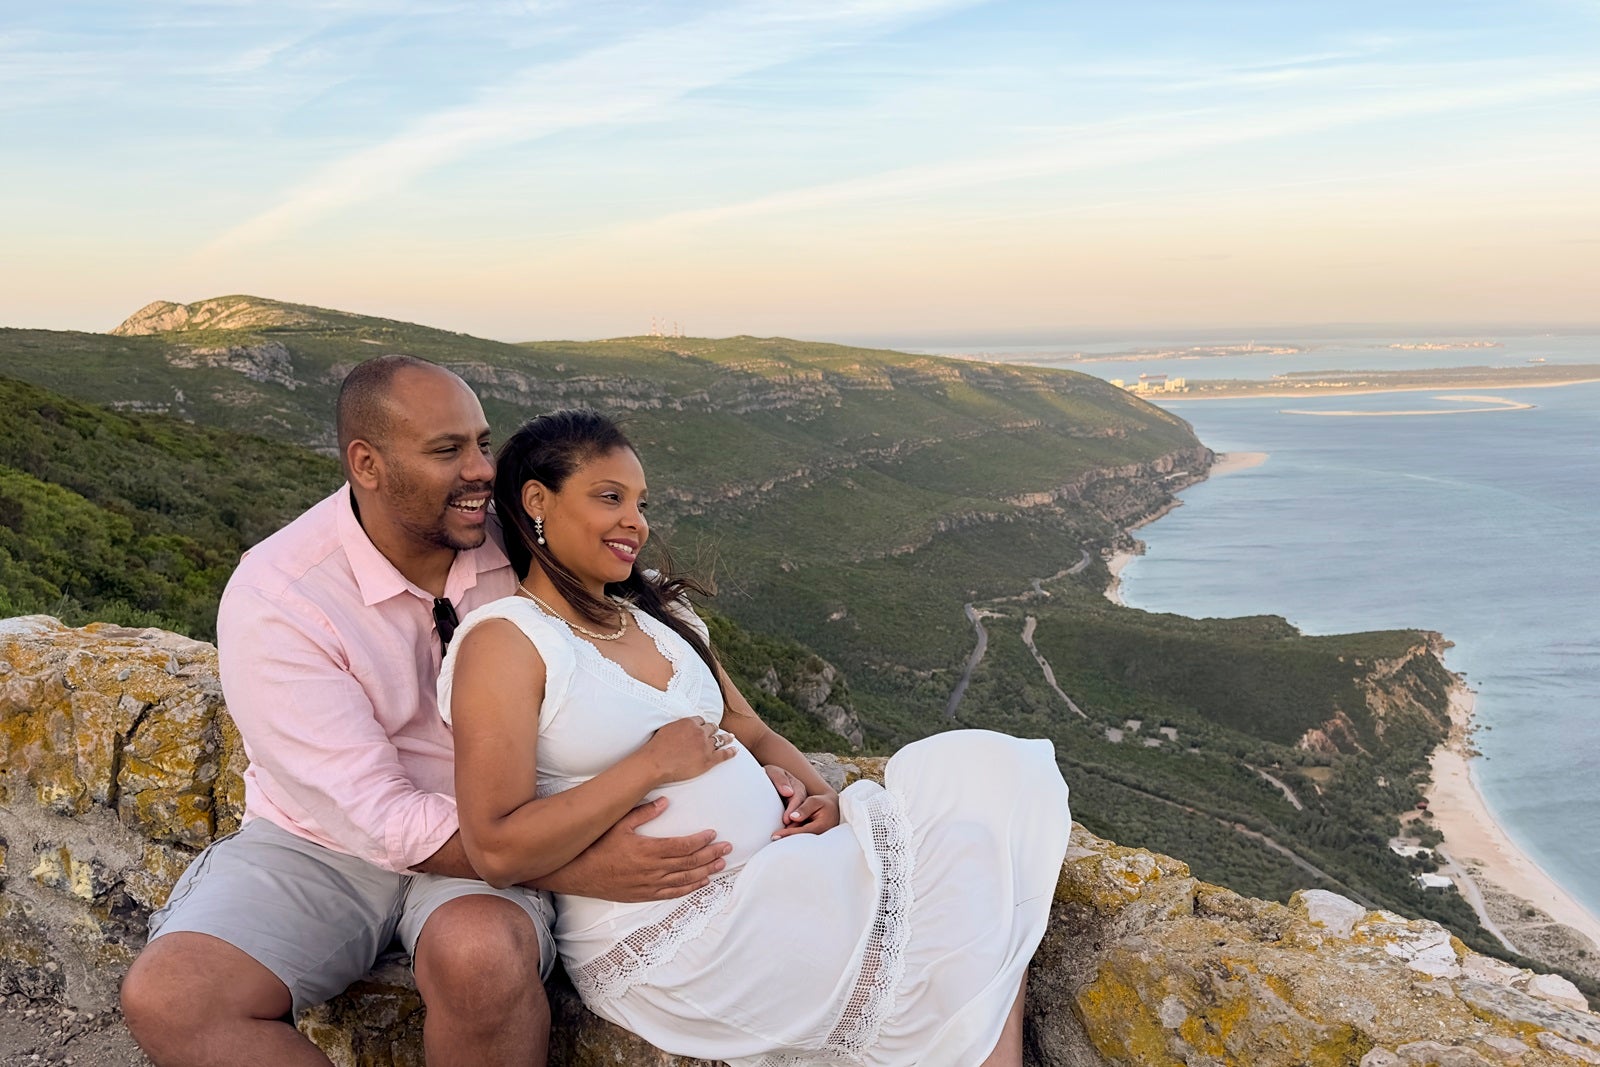 An expecting couple on a babymoon sitting on a rock overlooking the water